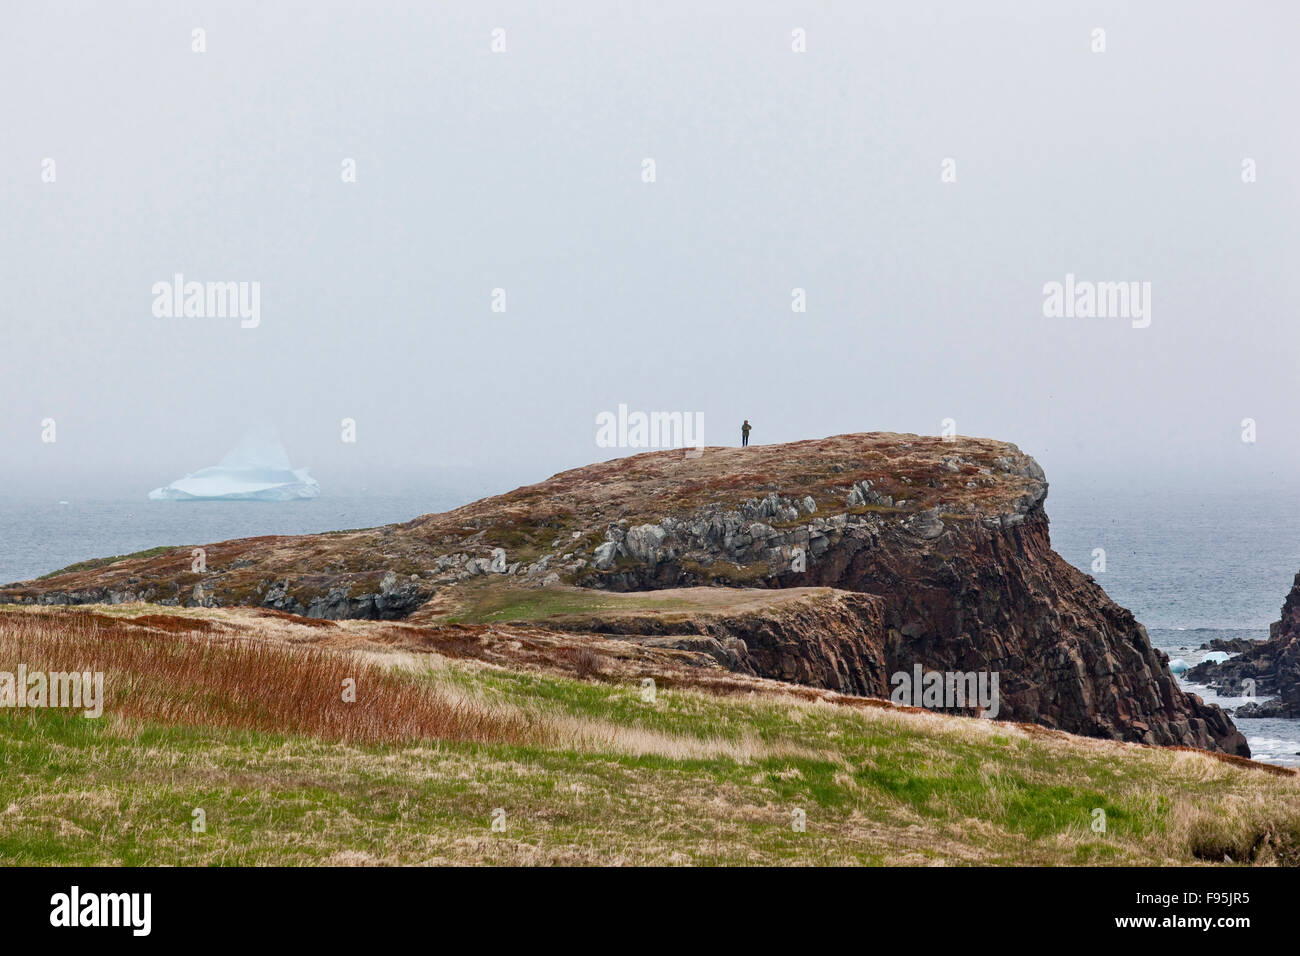 Hiker stopped to view an iceberg that is floating close to fogbound shore in Elliston, Newfoundland Stock Photo